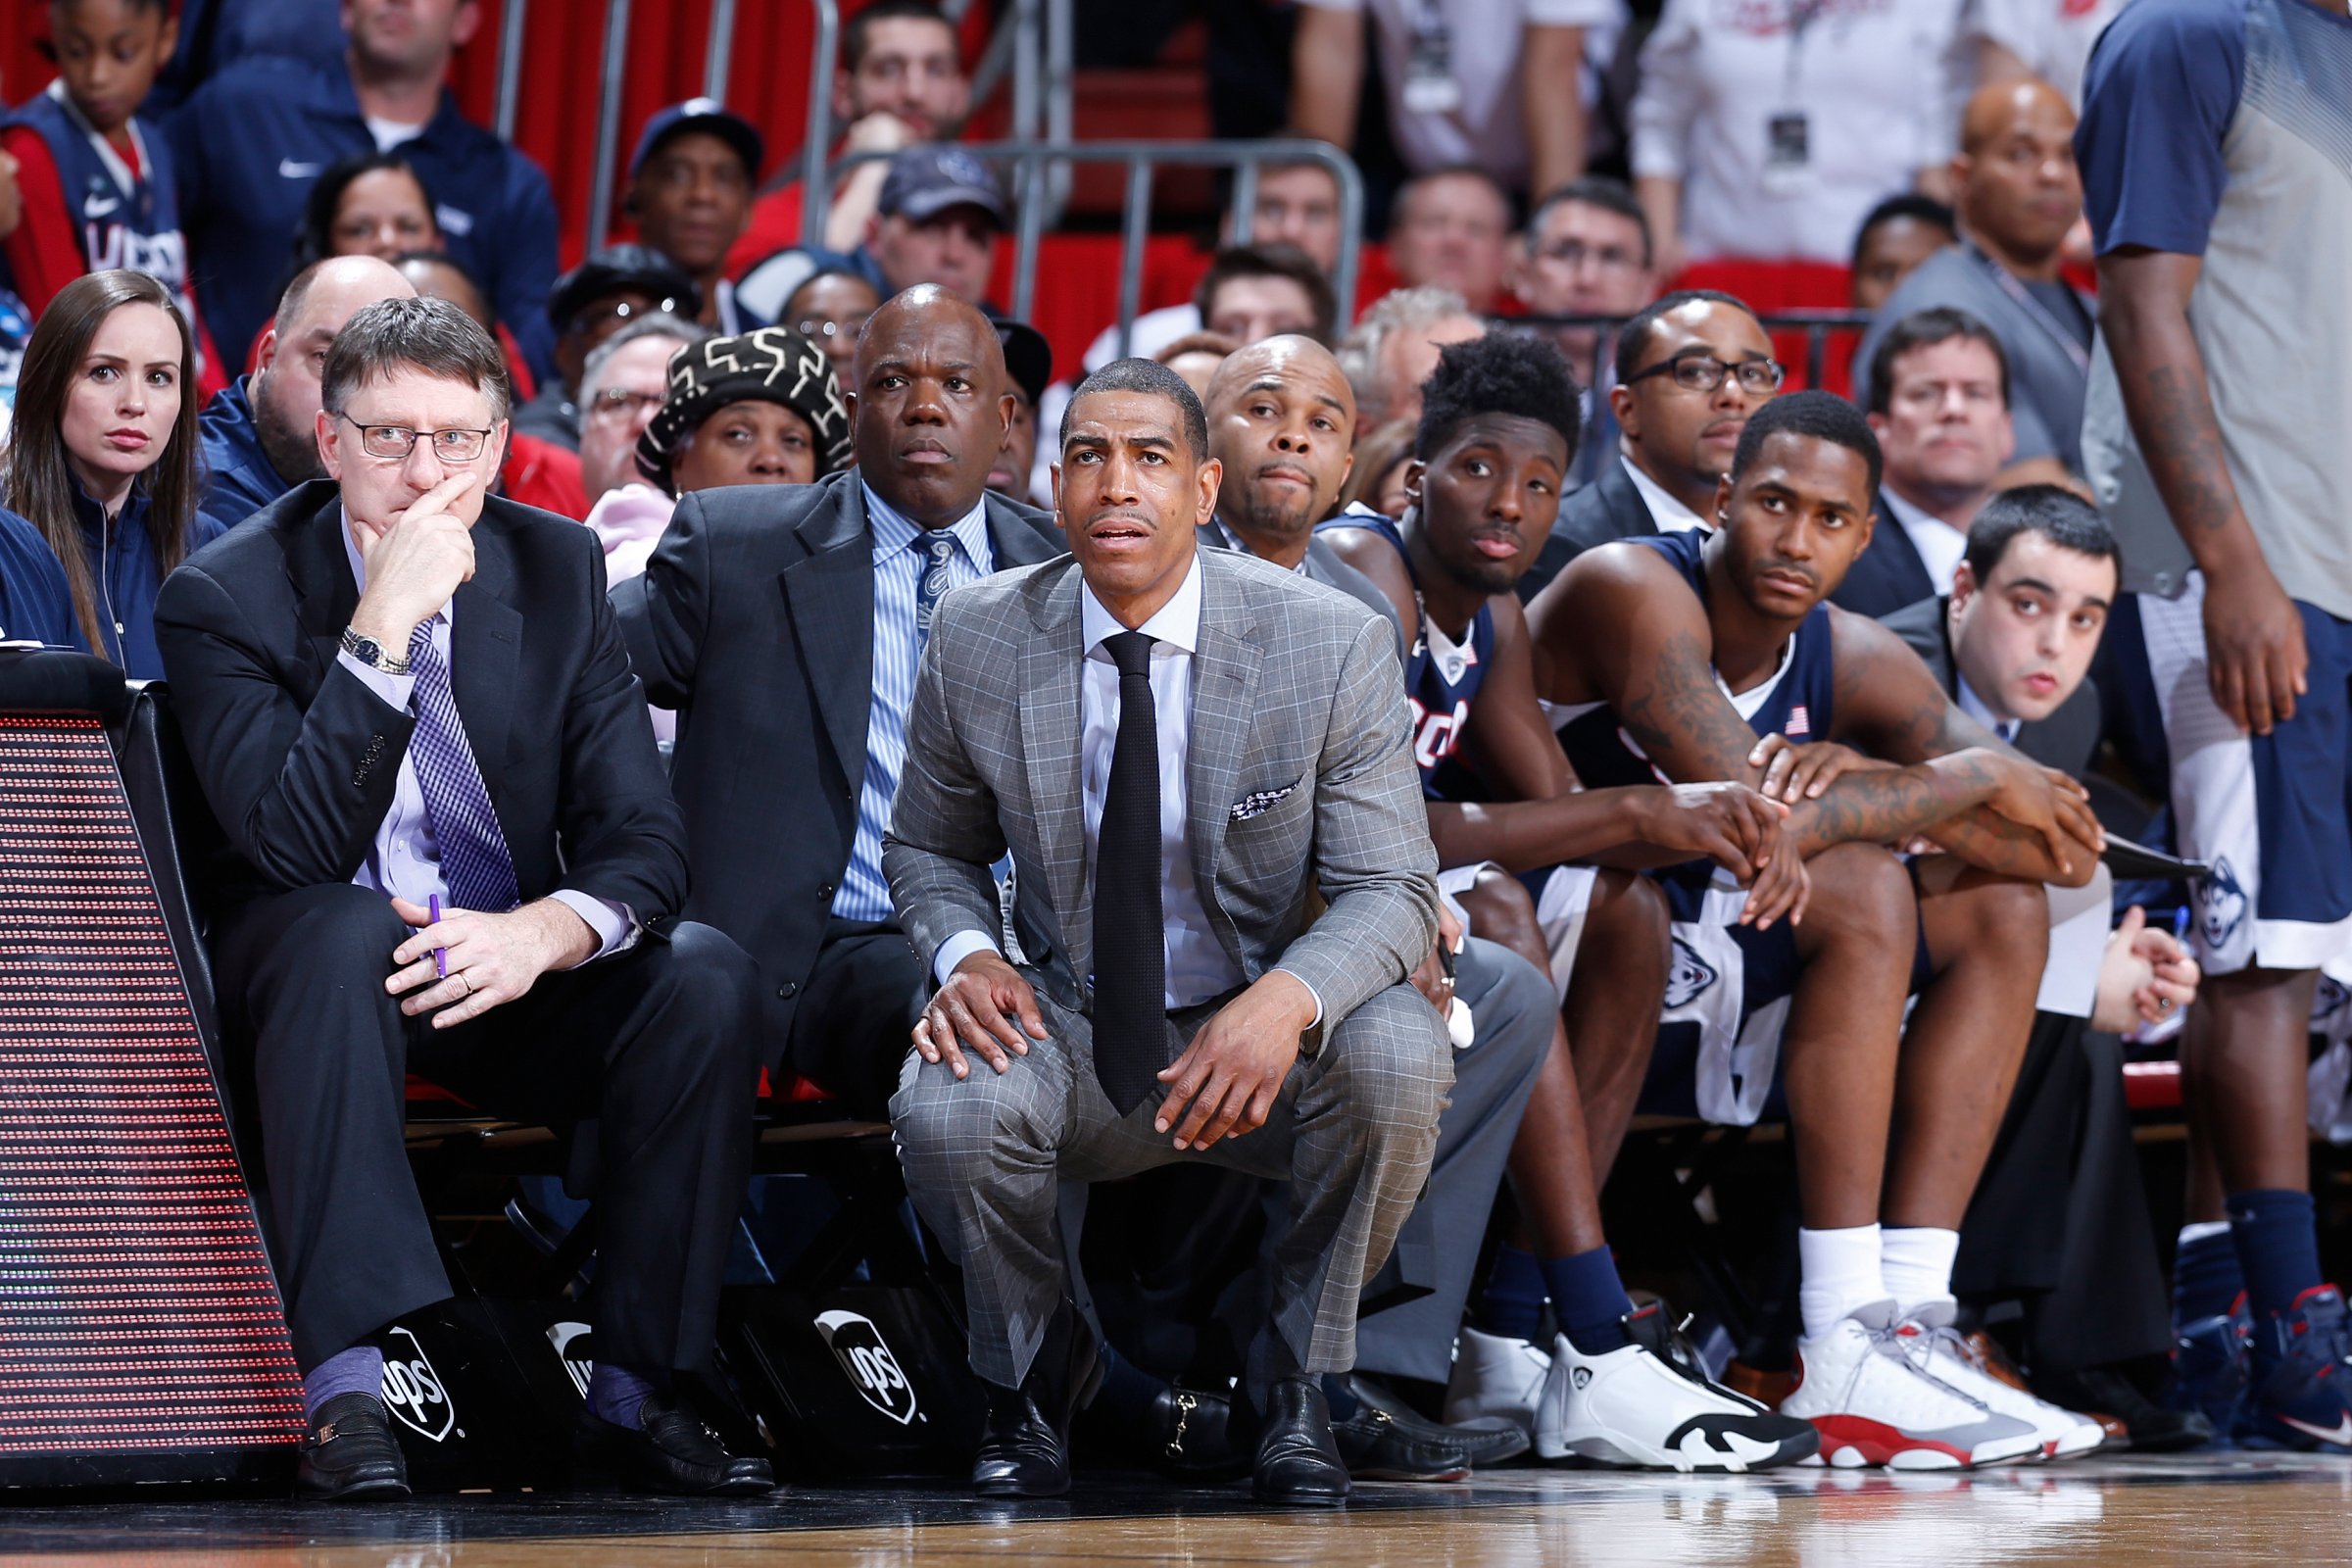 Head coach Kevin Ollie of the Connecticut Huskies looks on against the Cincinnati Bearcats during the game at Fifth Third Arena on Jan. 29, 2015 in Cincinnati.